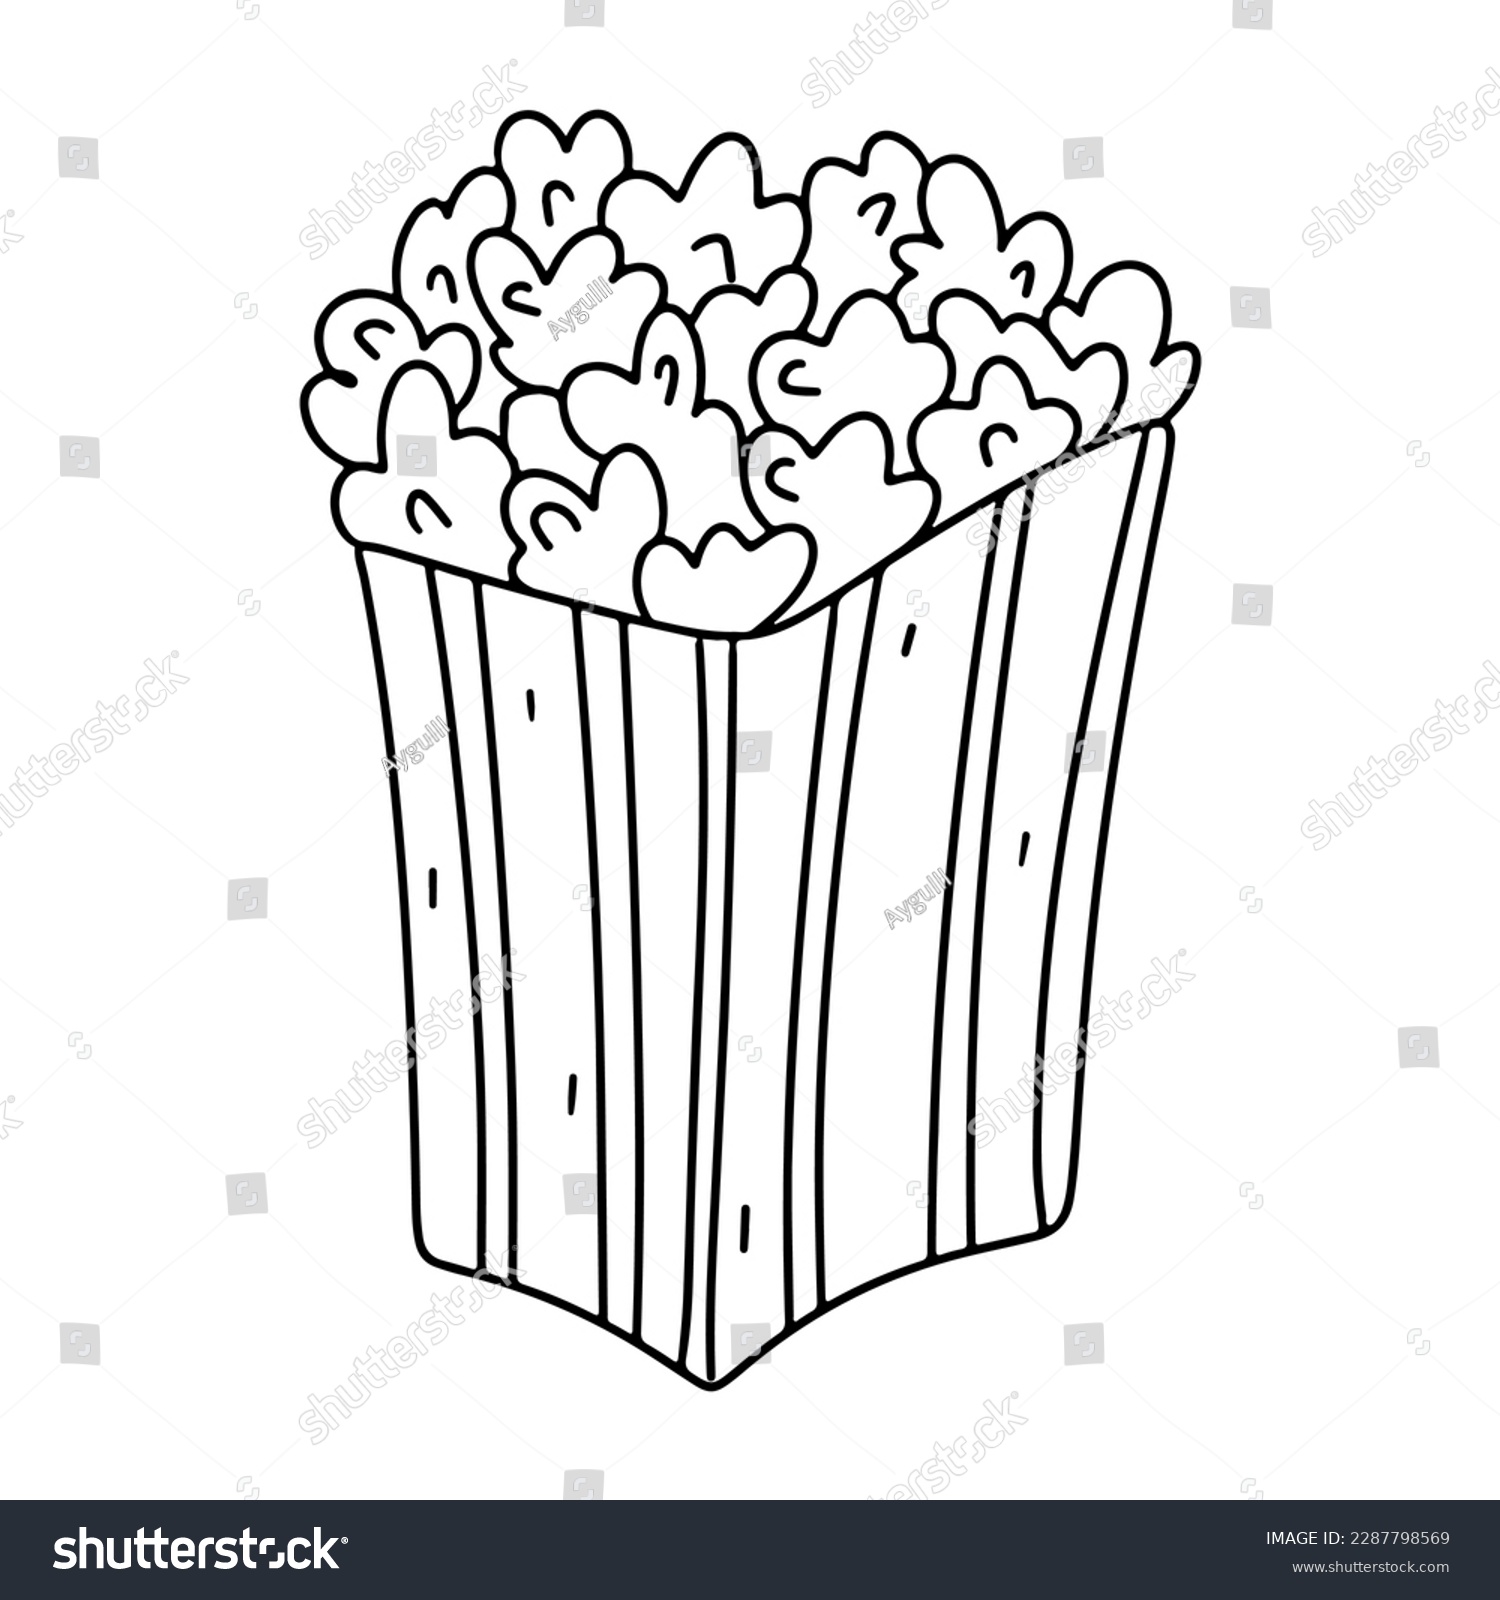 Popcorn coloring book images stock photos d objects vectors